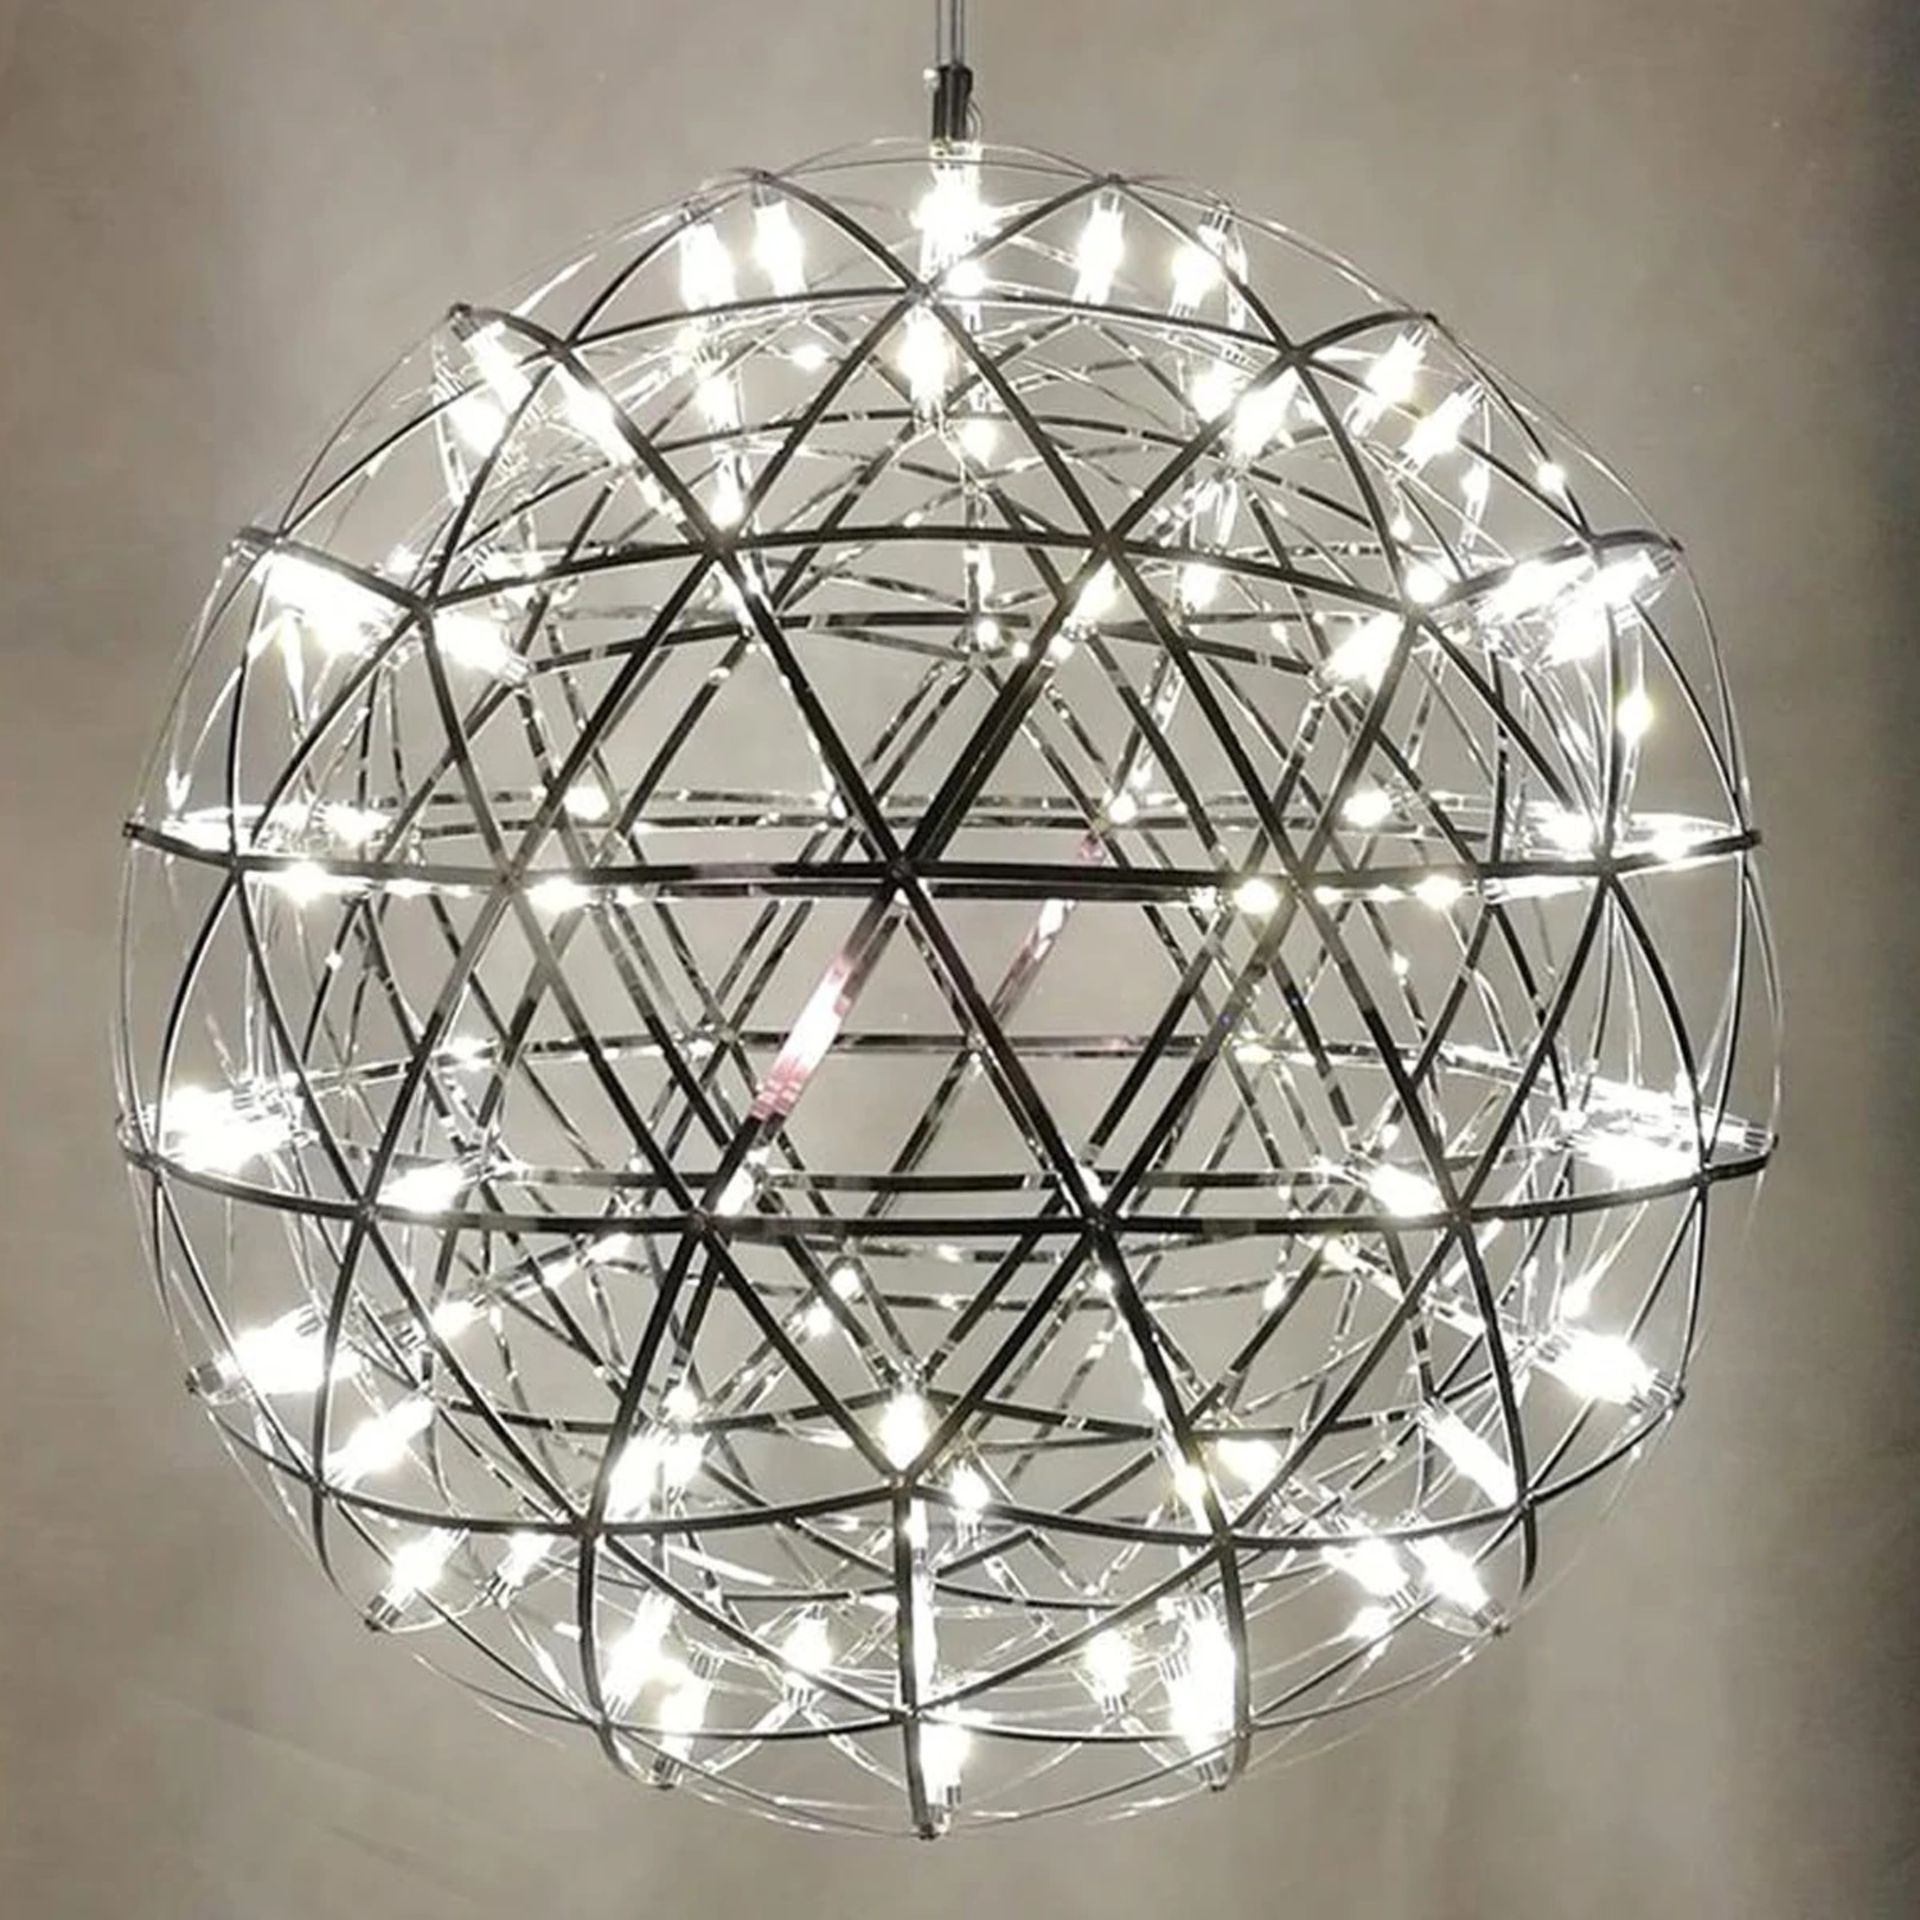 Starburst Hanging Pendant 50cm diameter x 42 lights with its chrome bodied spherical globe and - Image 2 of 3